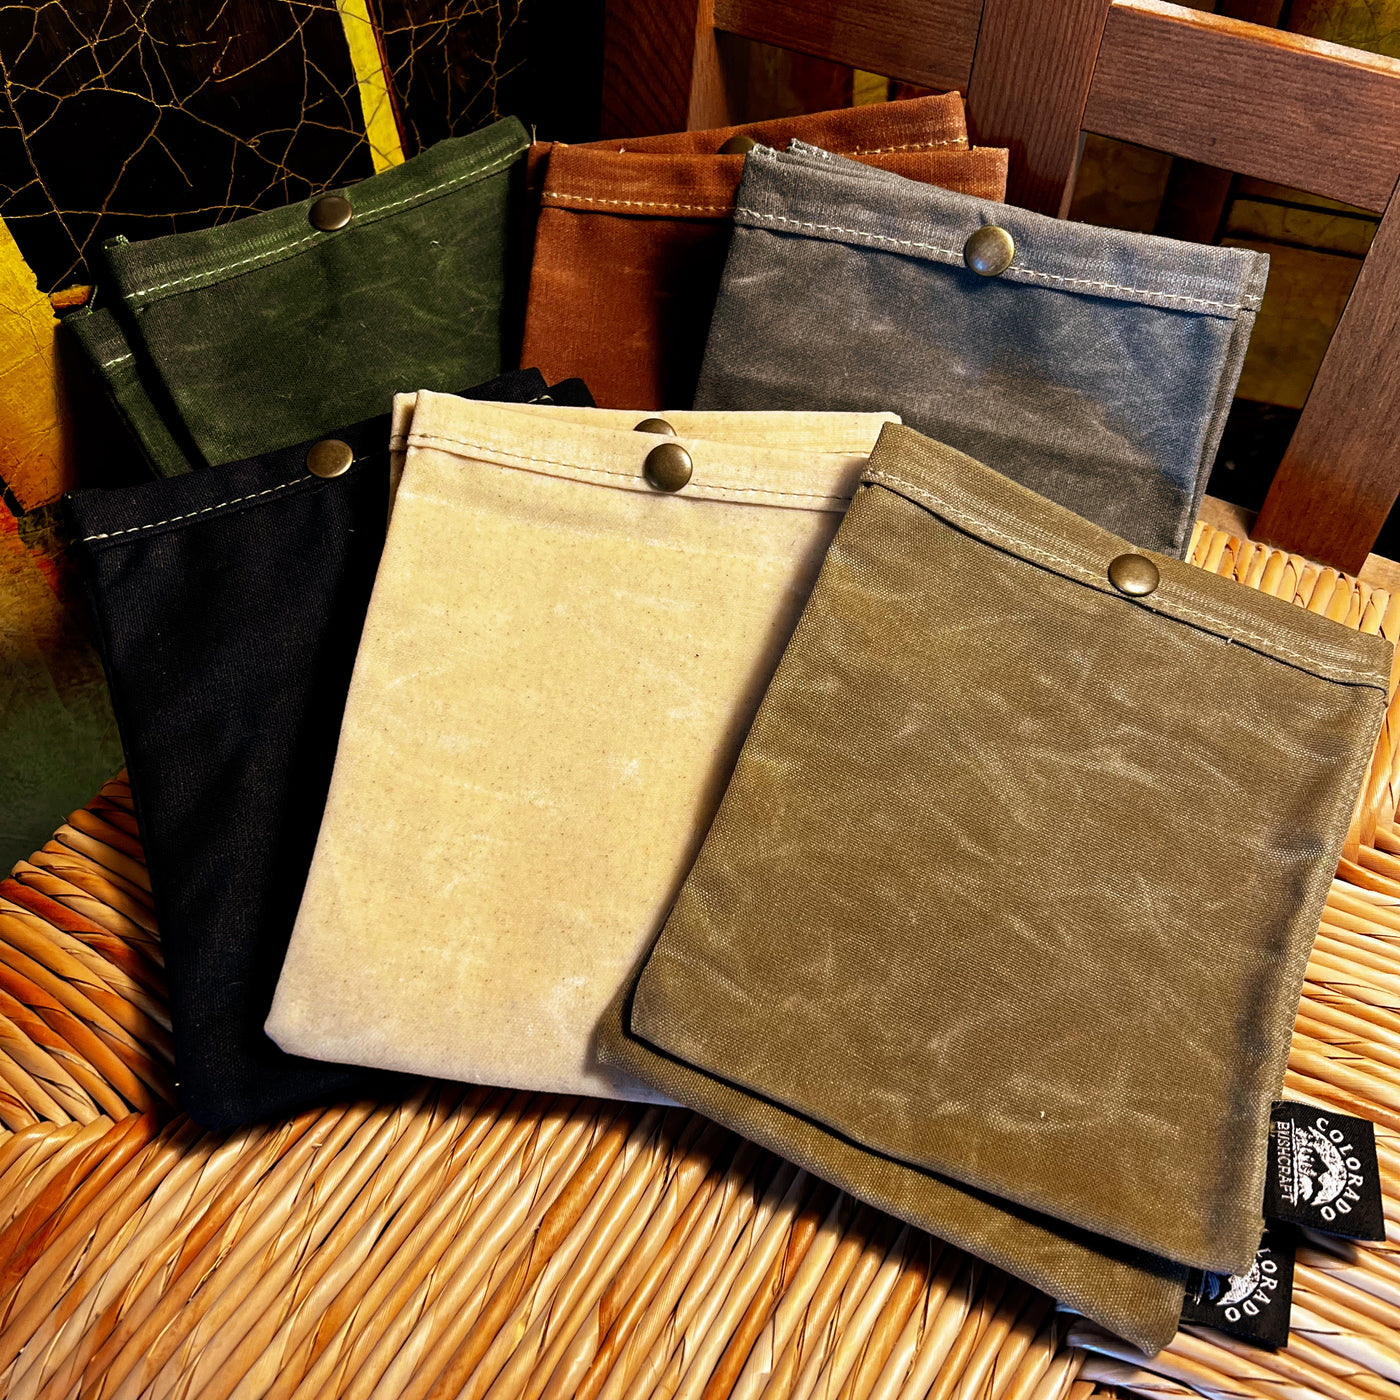 Set of Two Medium Handmade Waxed Canvas Ditty Bags for Bushcraft Camping Outdoors (Various Colors)